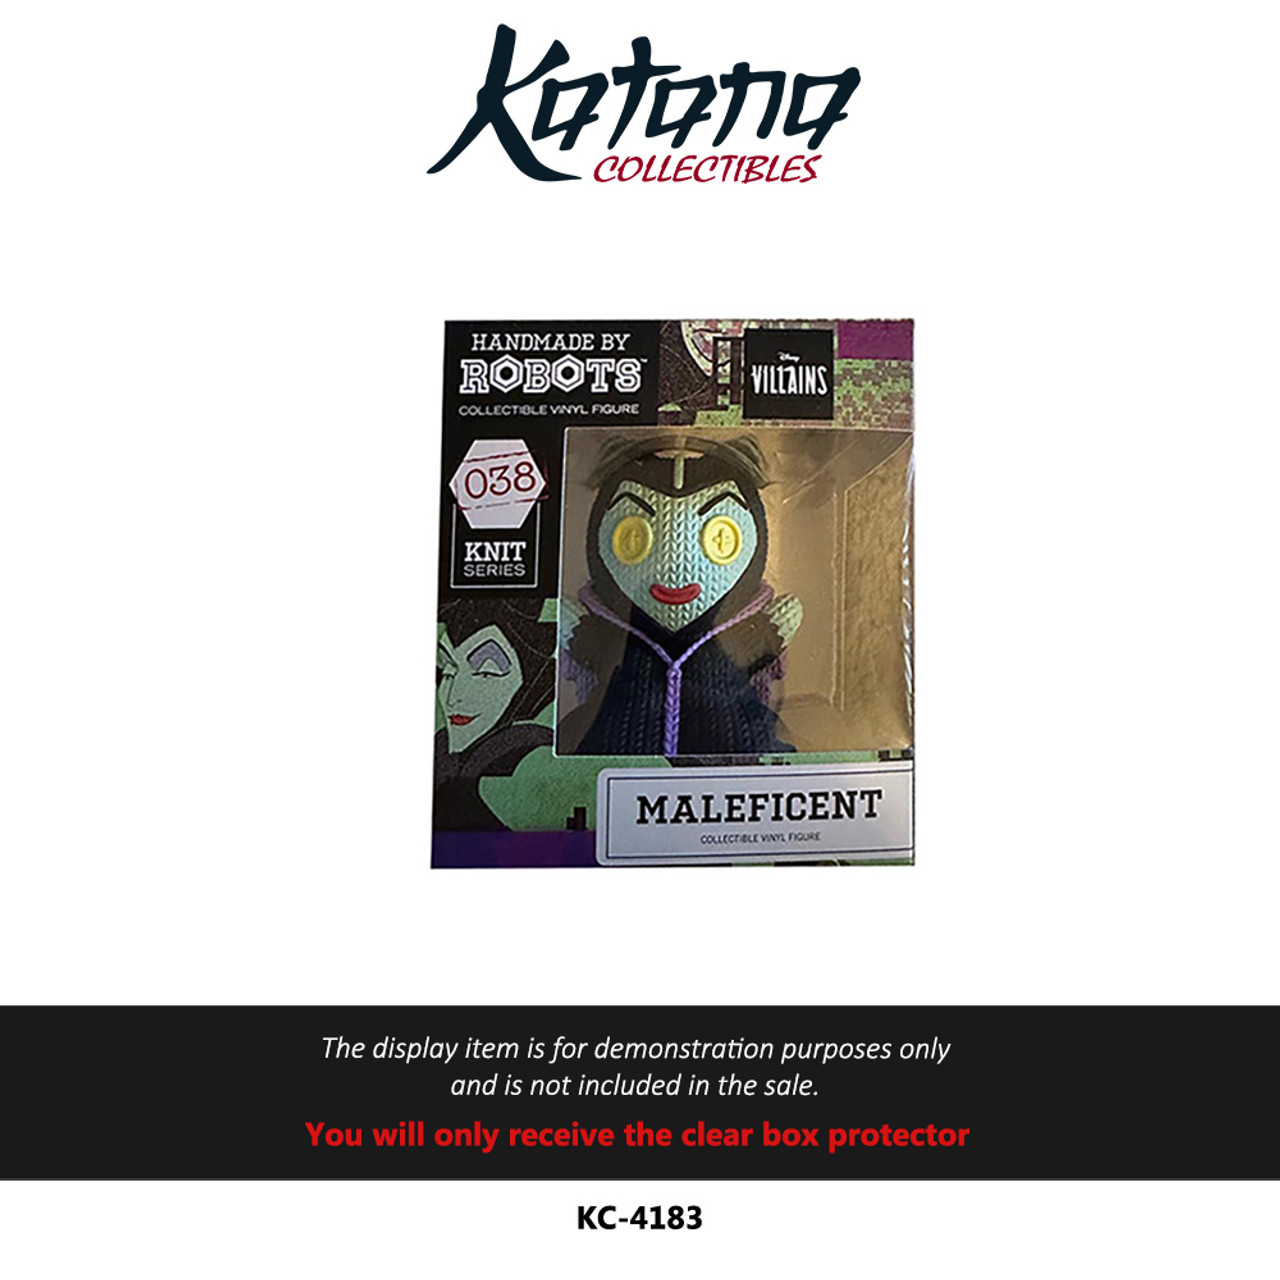 Katana Collectibles Protector For Handmade By Robots Knit Series Maleficent #038